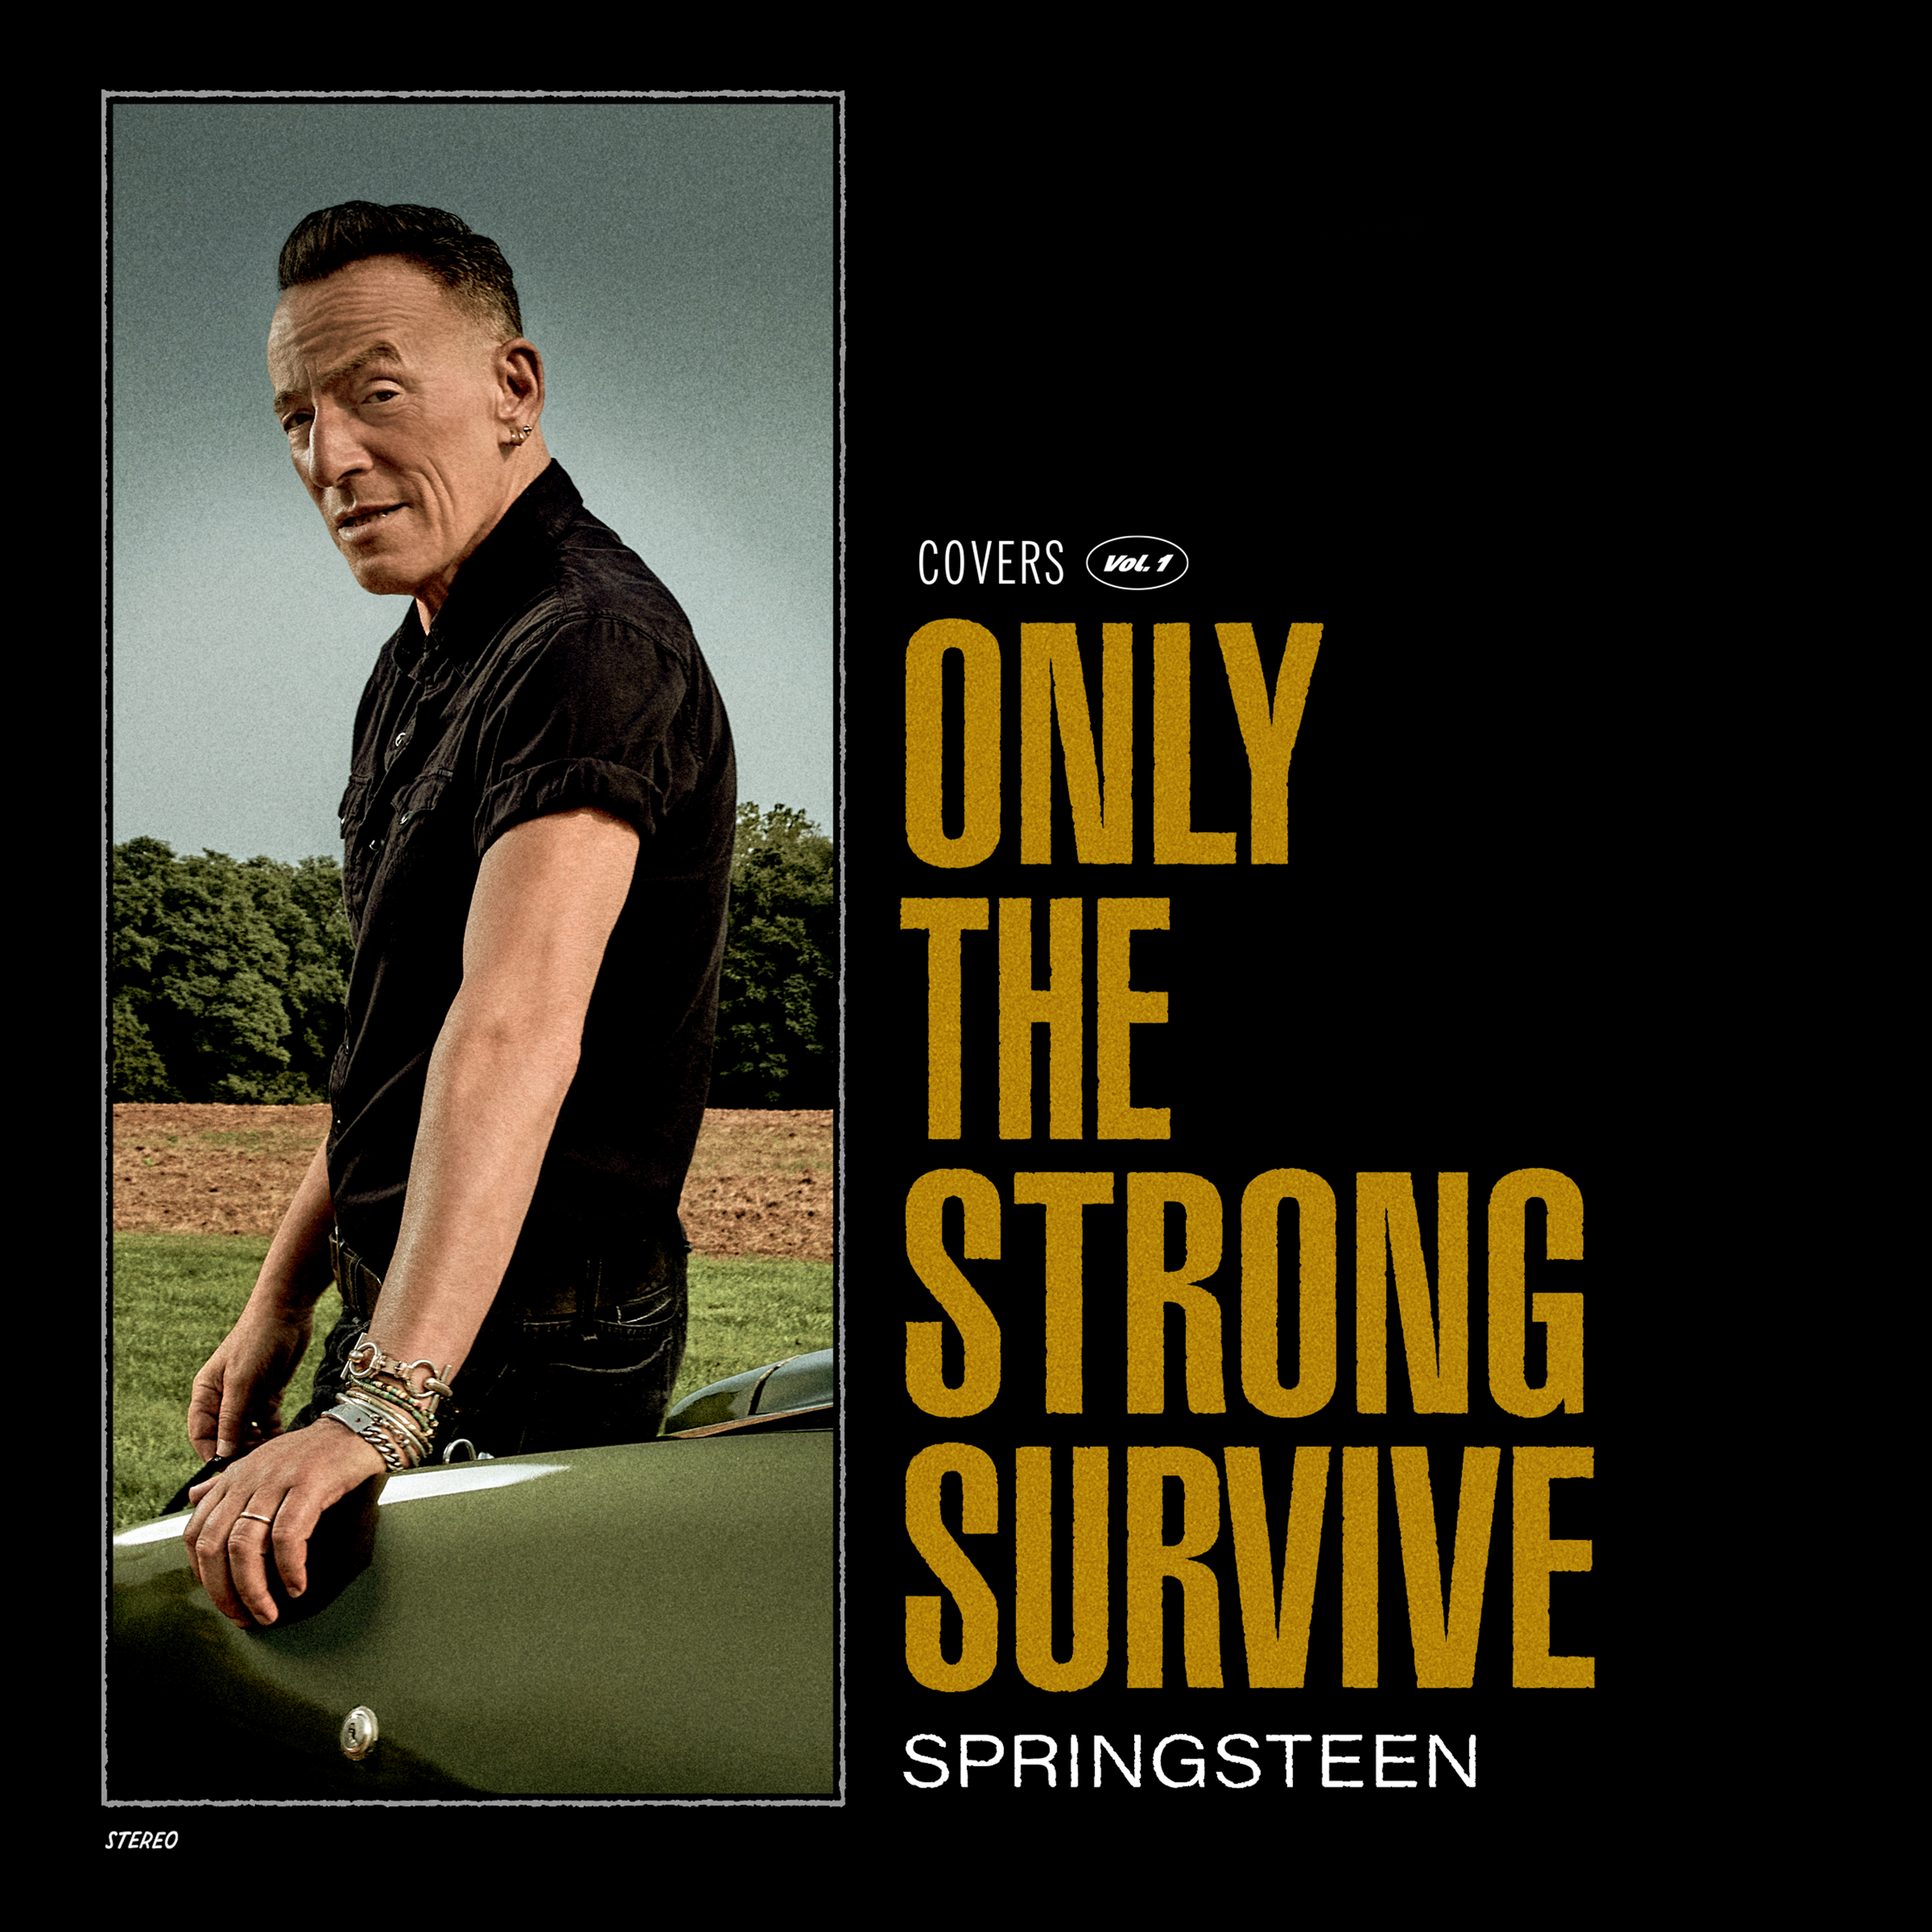 Bruce Springsteen Strong (Vinyl) the - Survive - Only